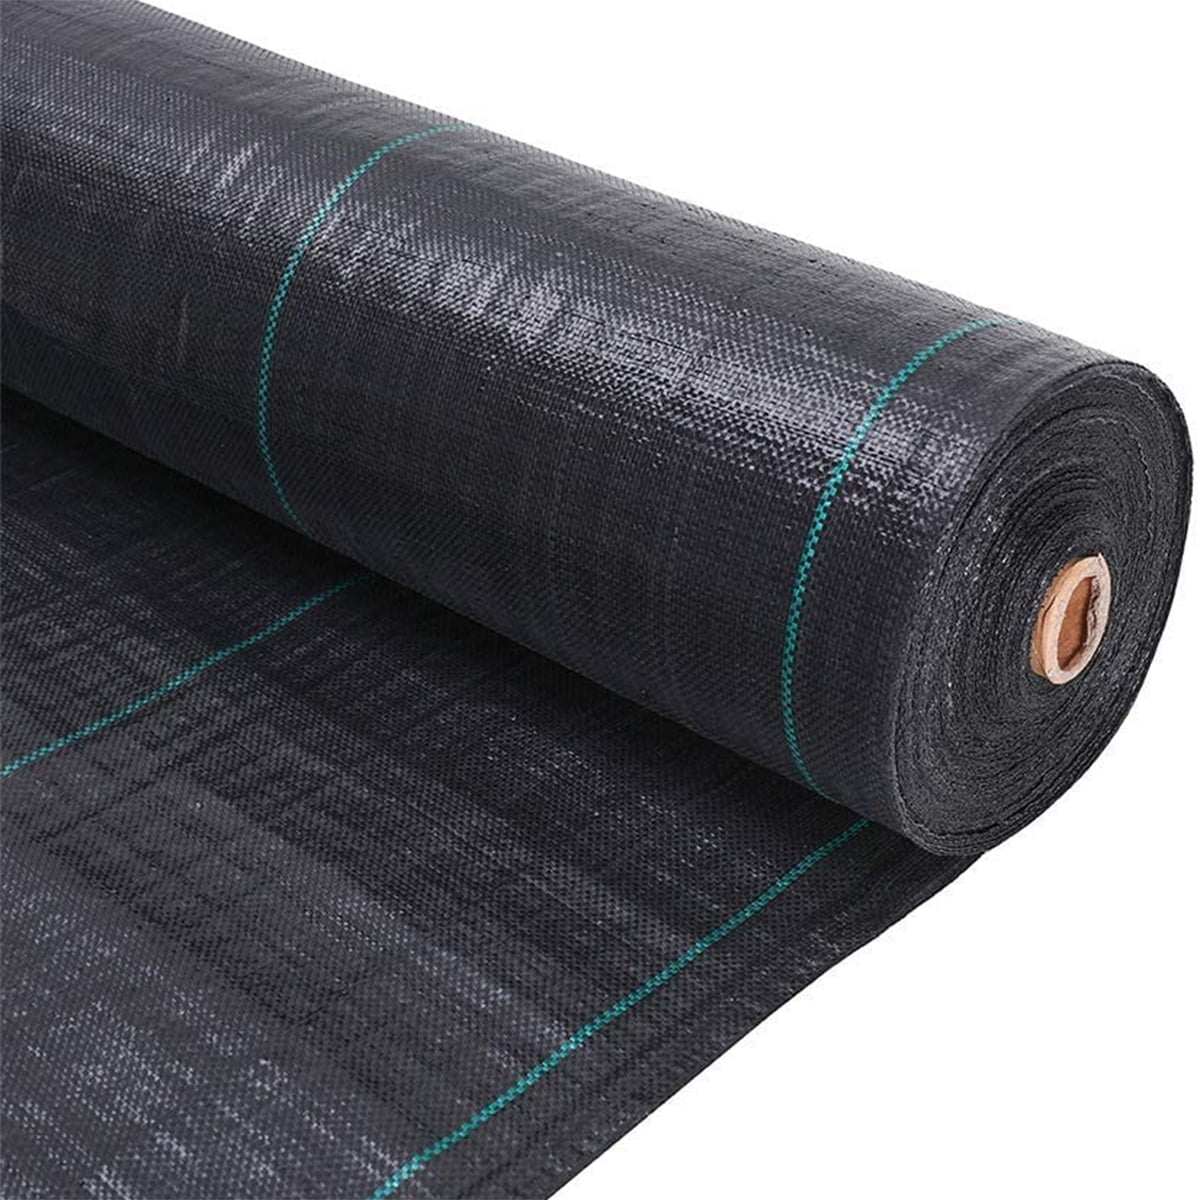 Pro-X Weed Barrier 6 Oz Woven Landscape Fabric 4 X 250' Roll Mat FREE SHIPPING 